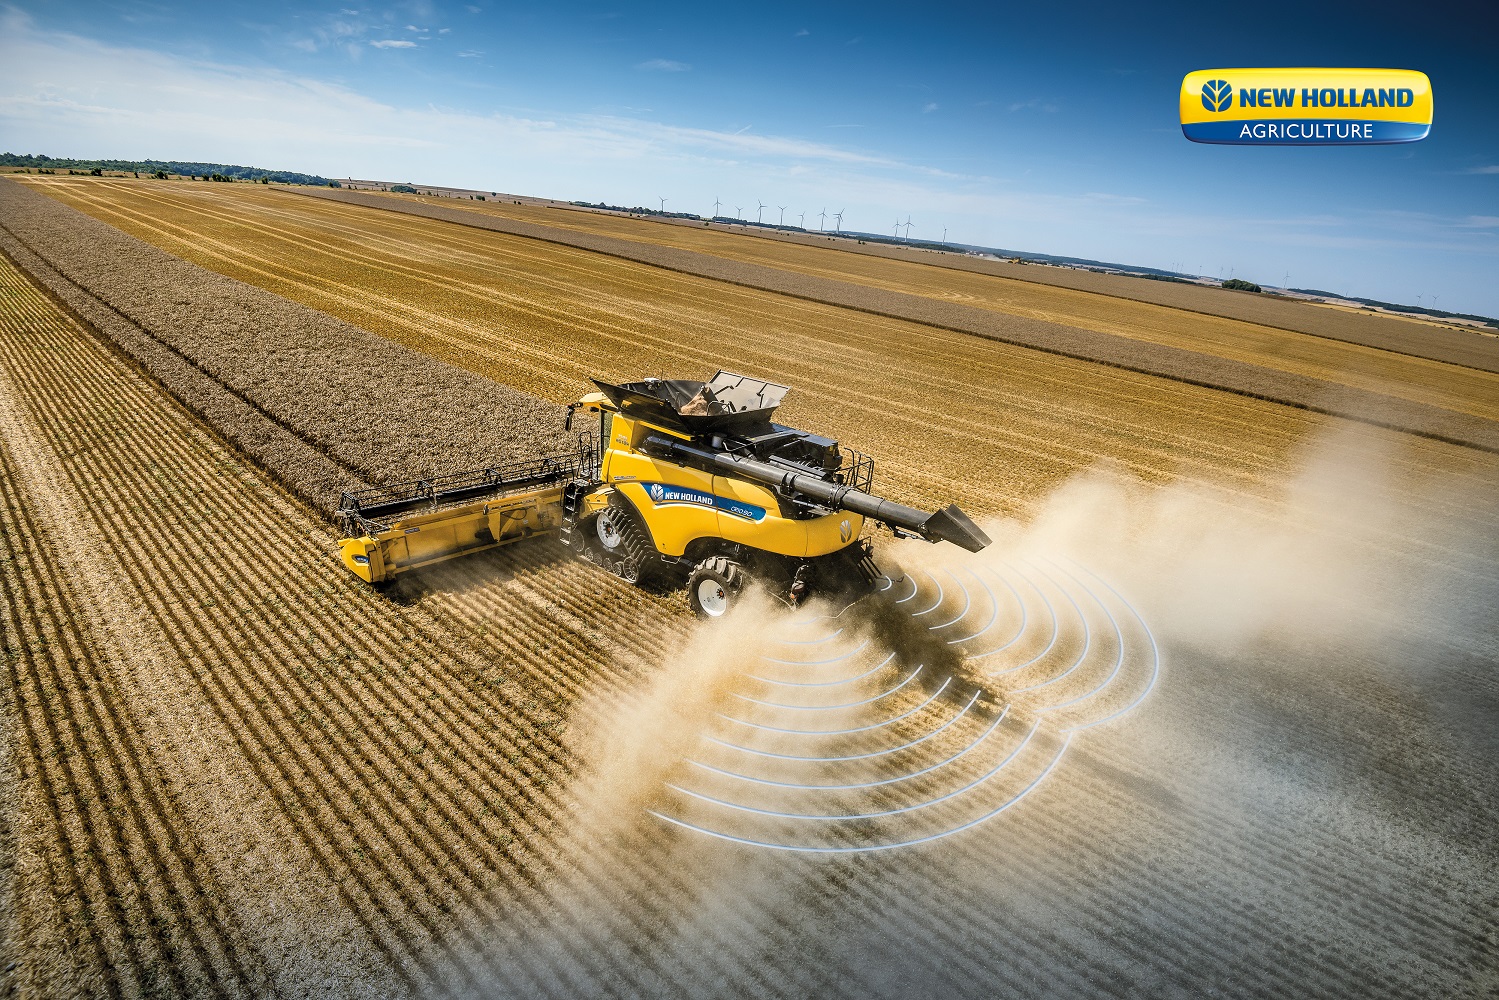 New Holland’s new combine residue automation system uses 2D radars to obtain an accurate spreading pattern image of the residue particles behind the combine